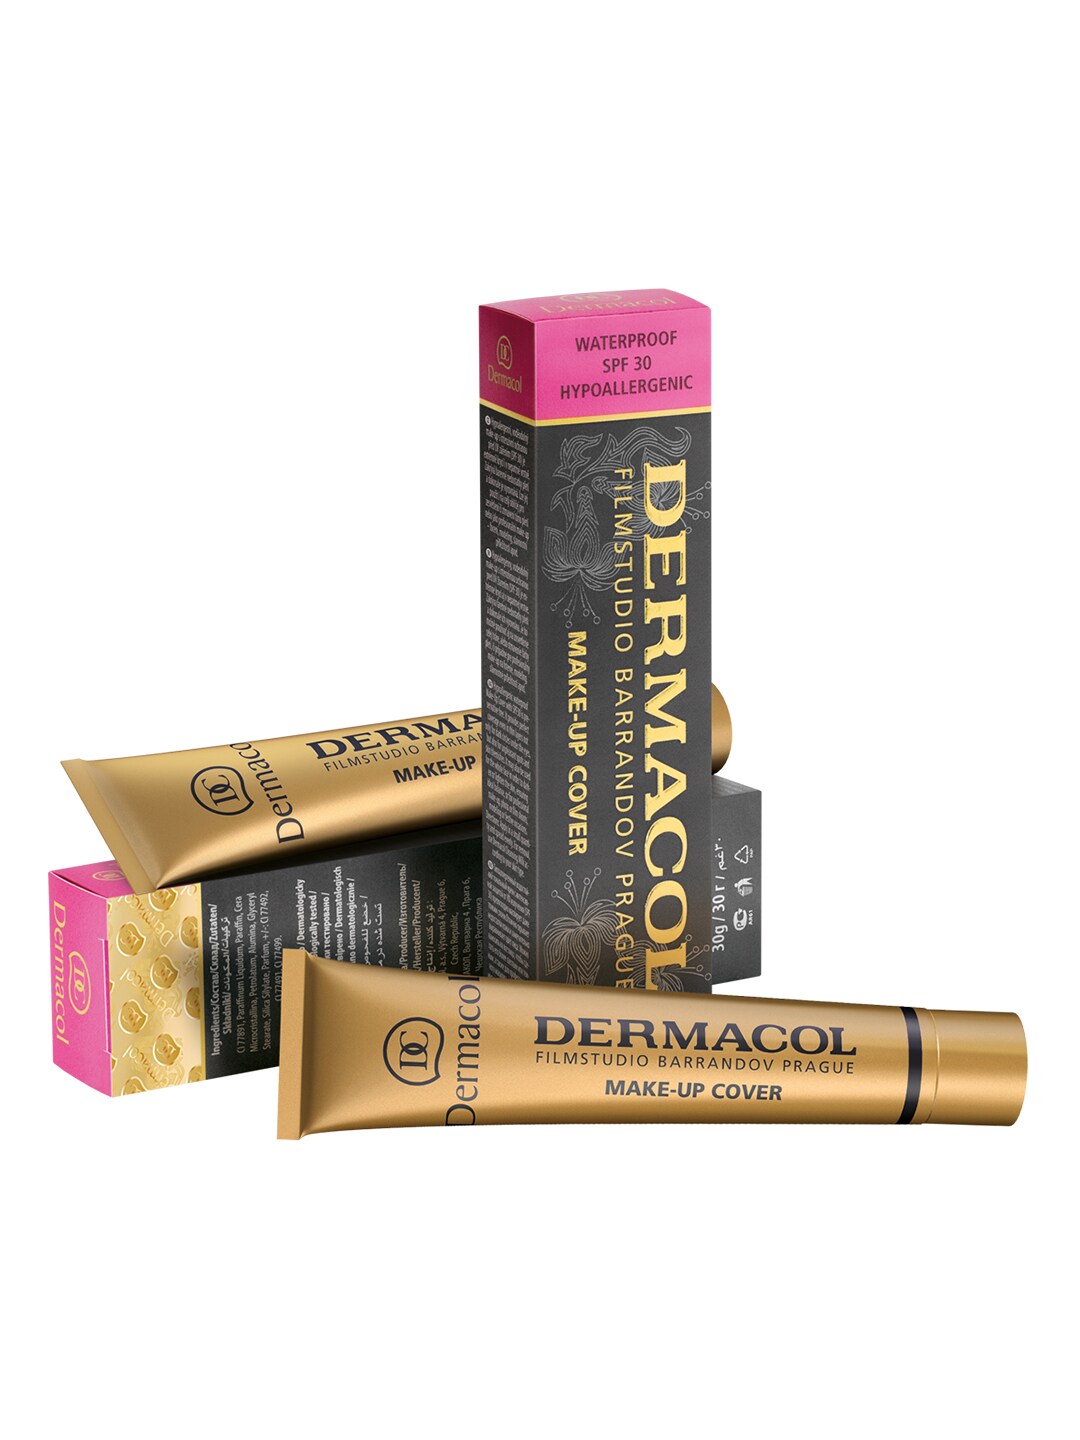 Dermacol Makeup cover shade 215 Price in India